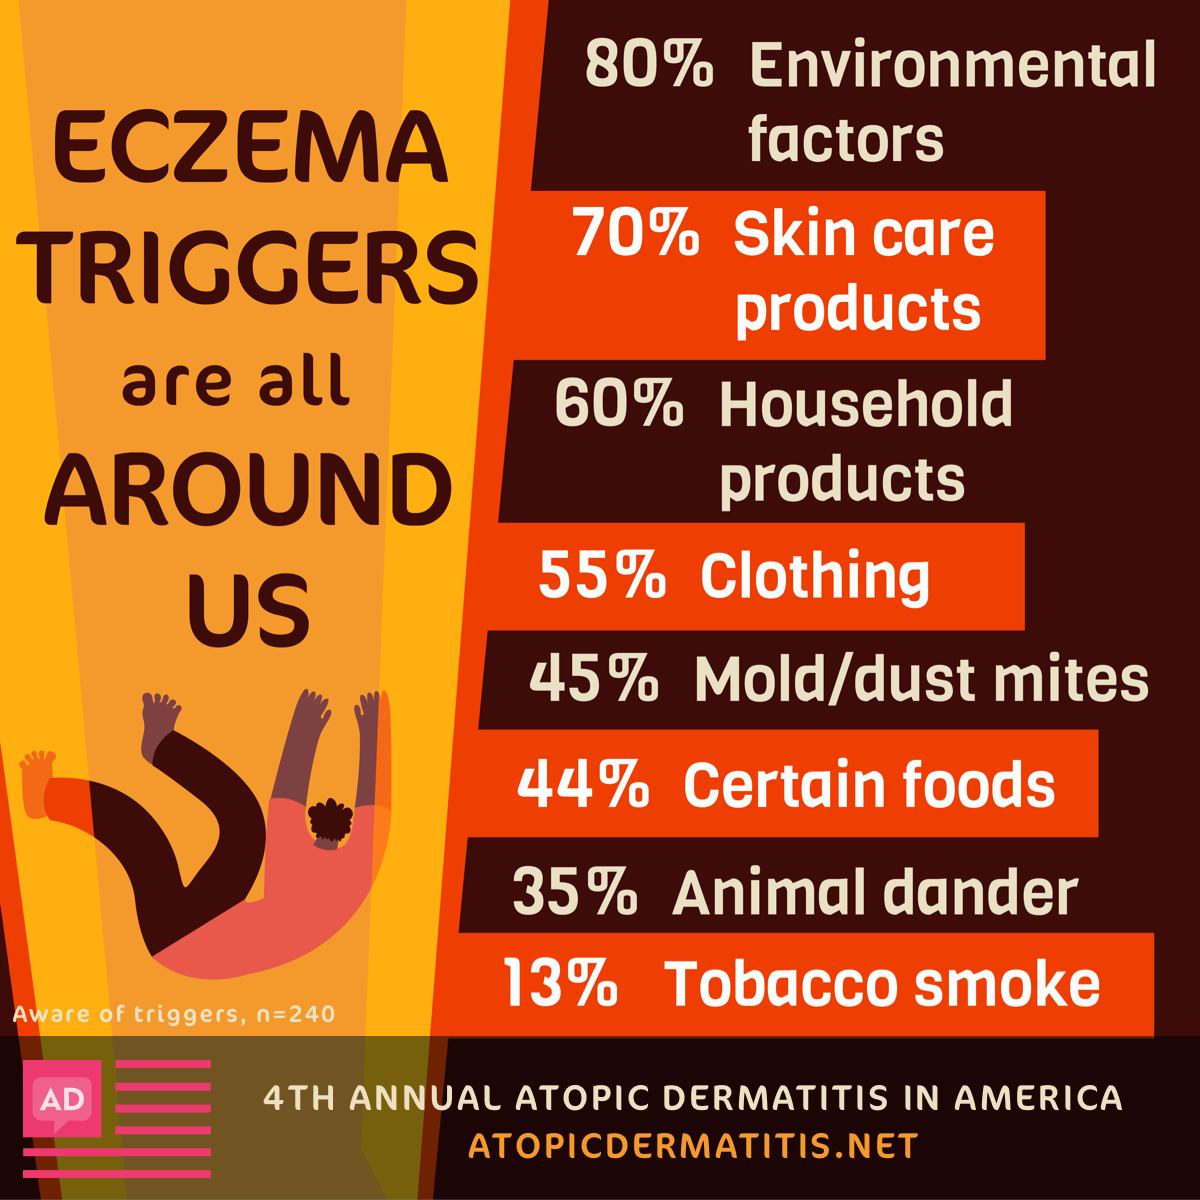 Eczema triggers include the environment, skin care products, household products, clothing, mold and dust mites, food, and more.